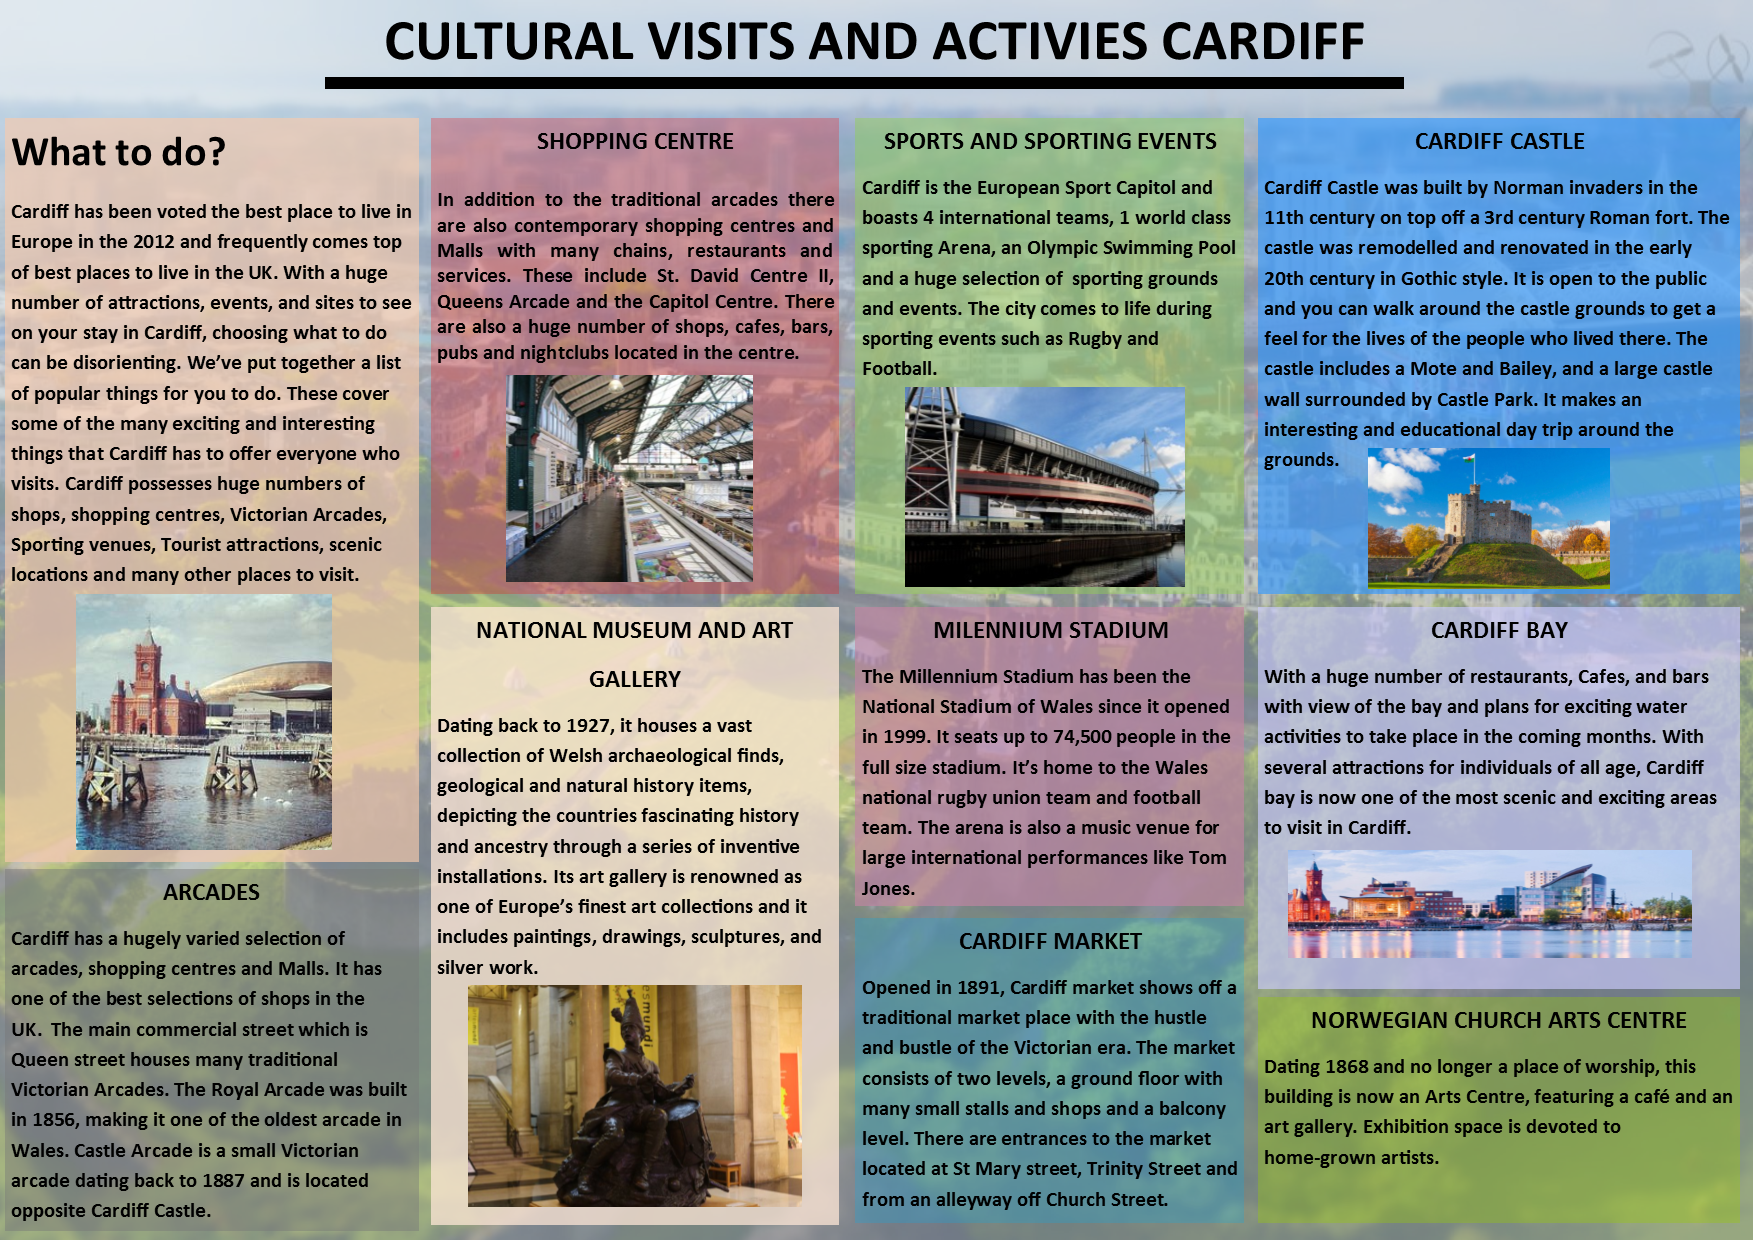 things to do in cardiff